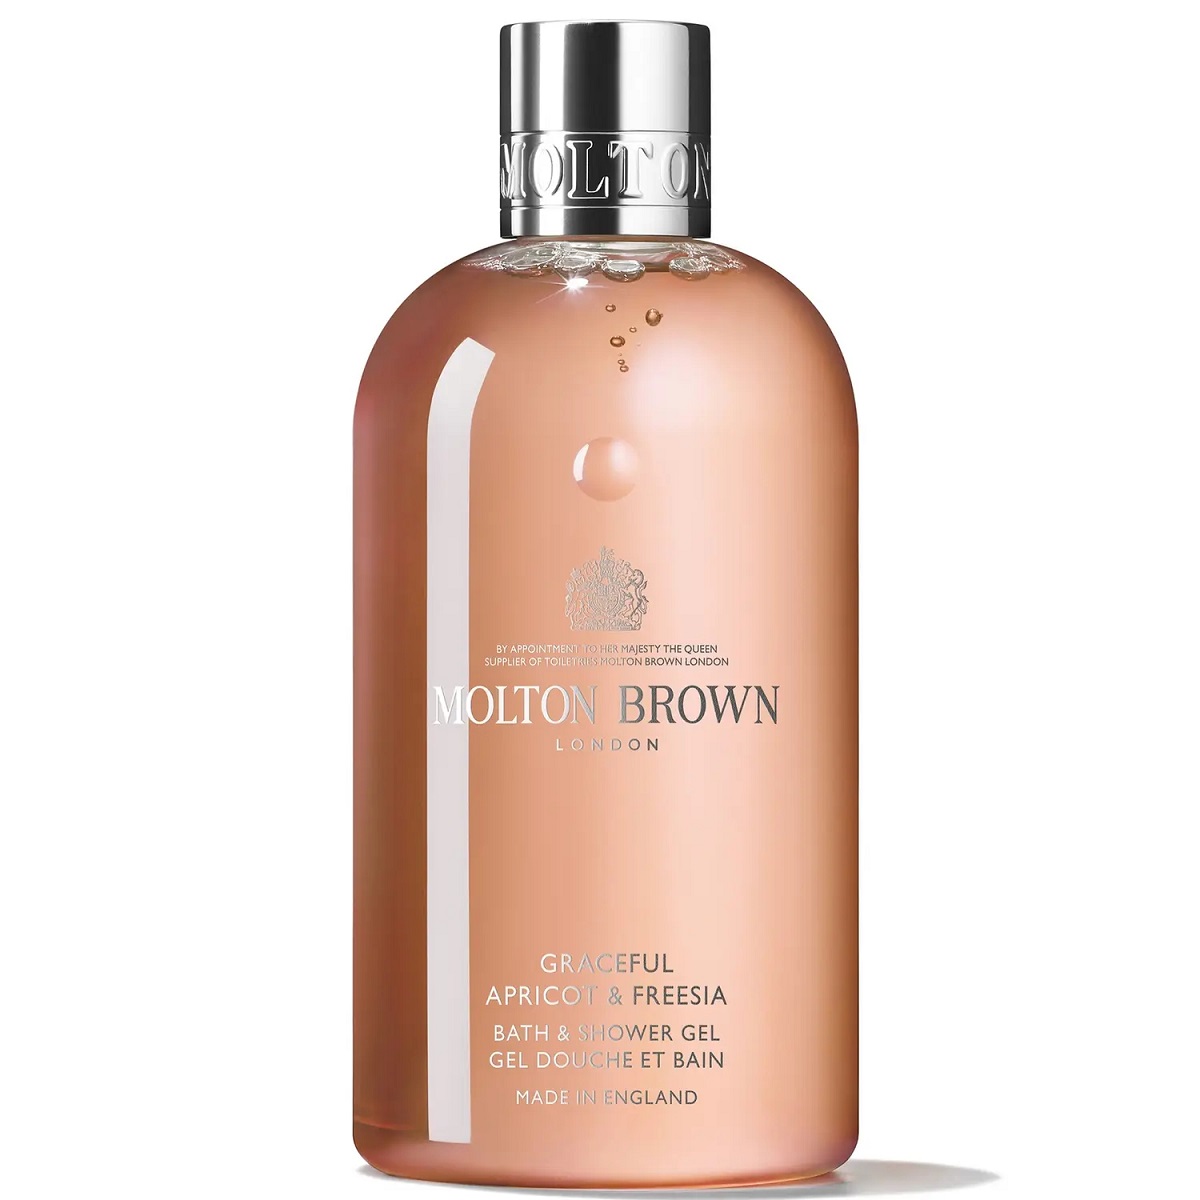 Molton Brown Graceful Apricot and Freesia Bath and Shower Gel